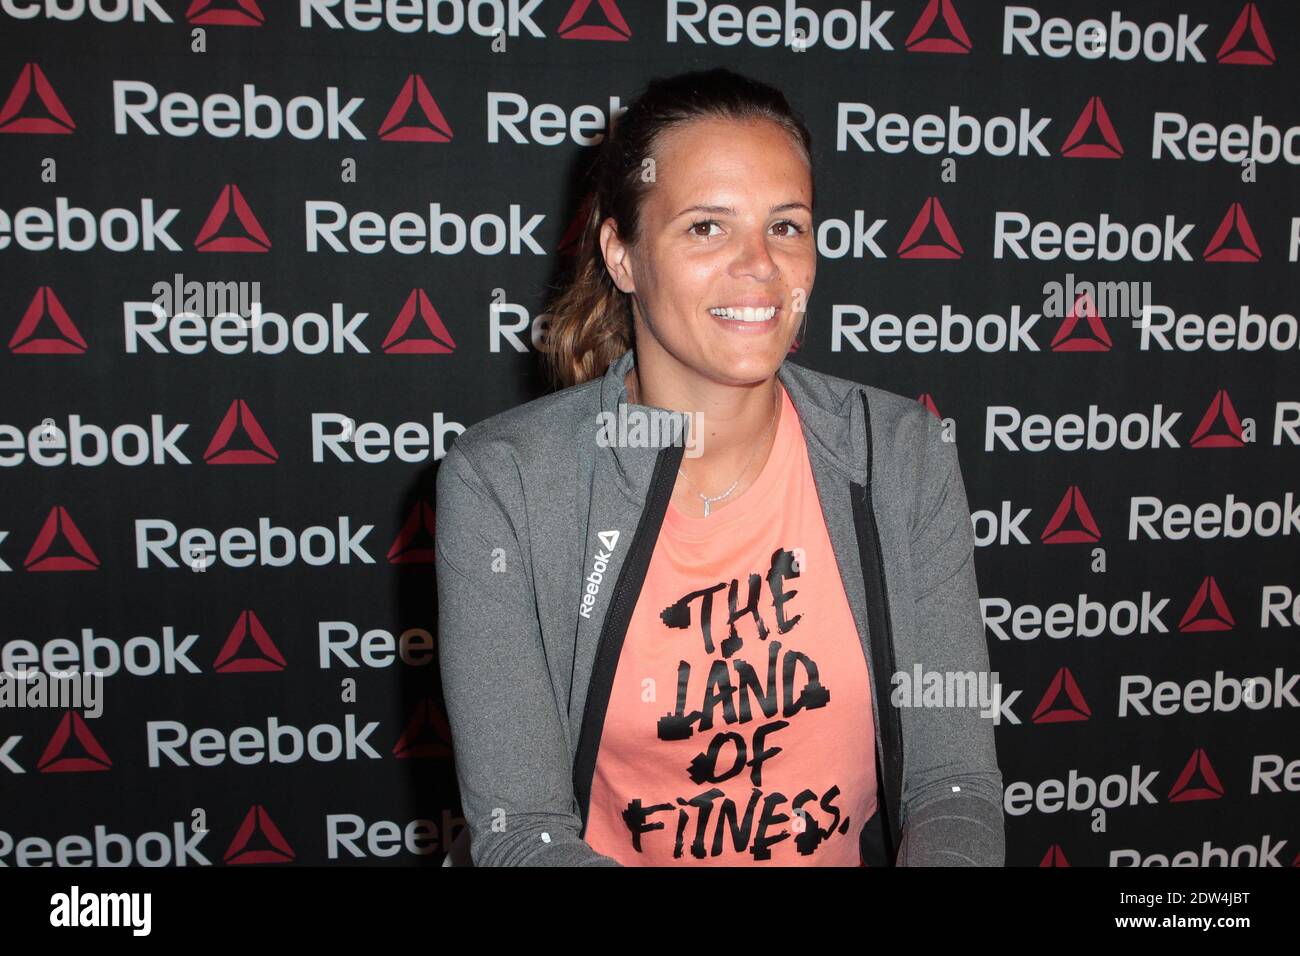 Reebok Team ambassador Laure Manaudou attends a signing session to launch  the campaign 'Live with Fire' held at Intersport Rivoli store in Paris,  France on April 23, 2014. Photo by Audrey Poree/ABACAPRESS.COM